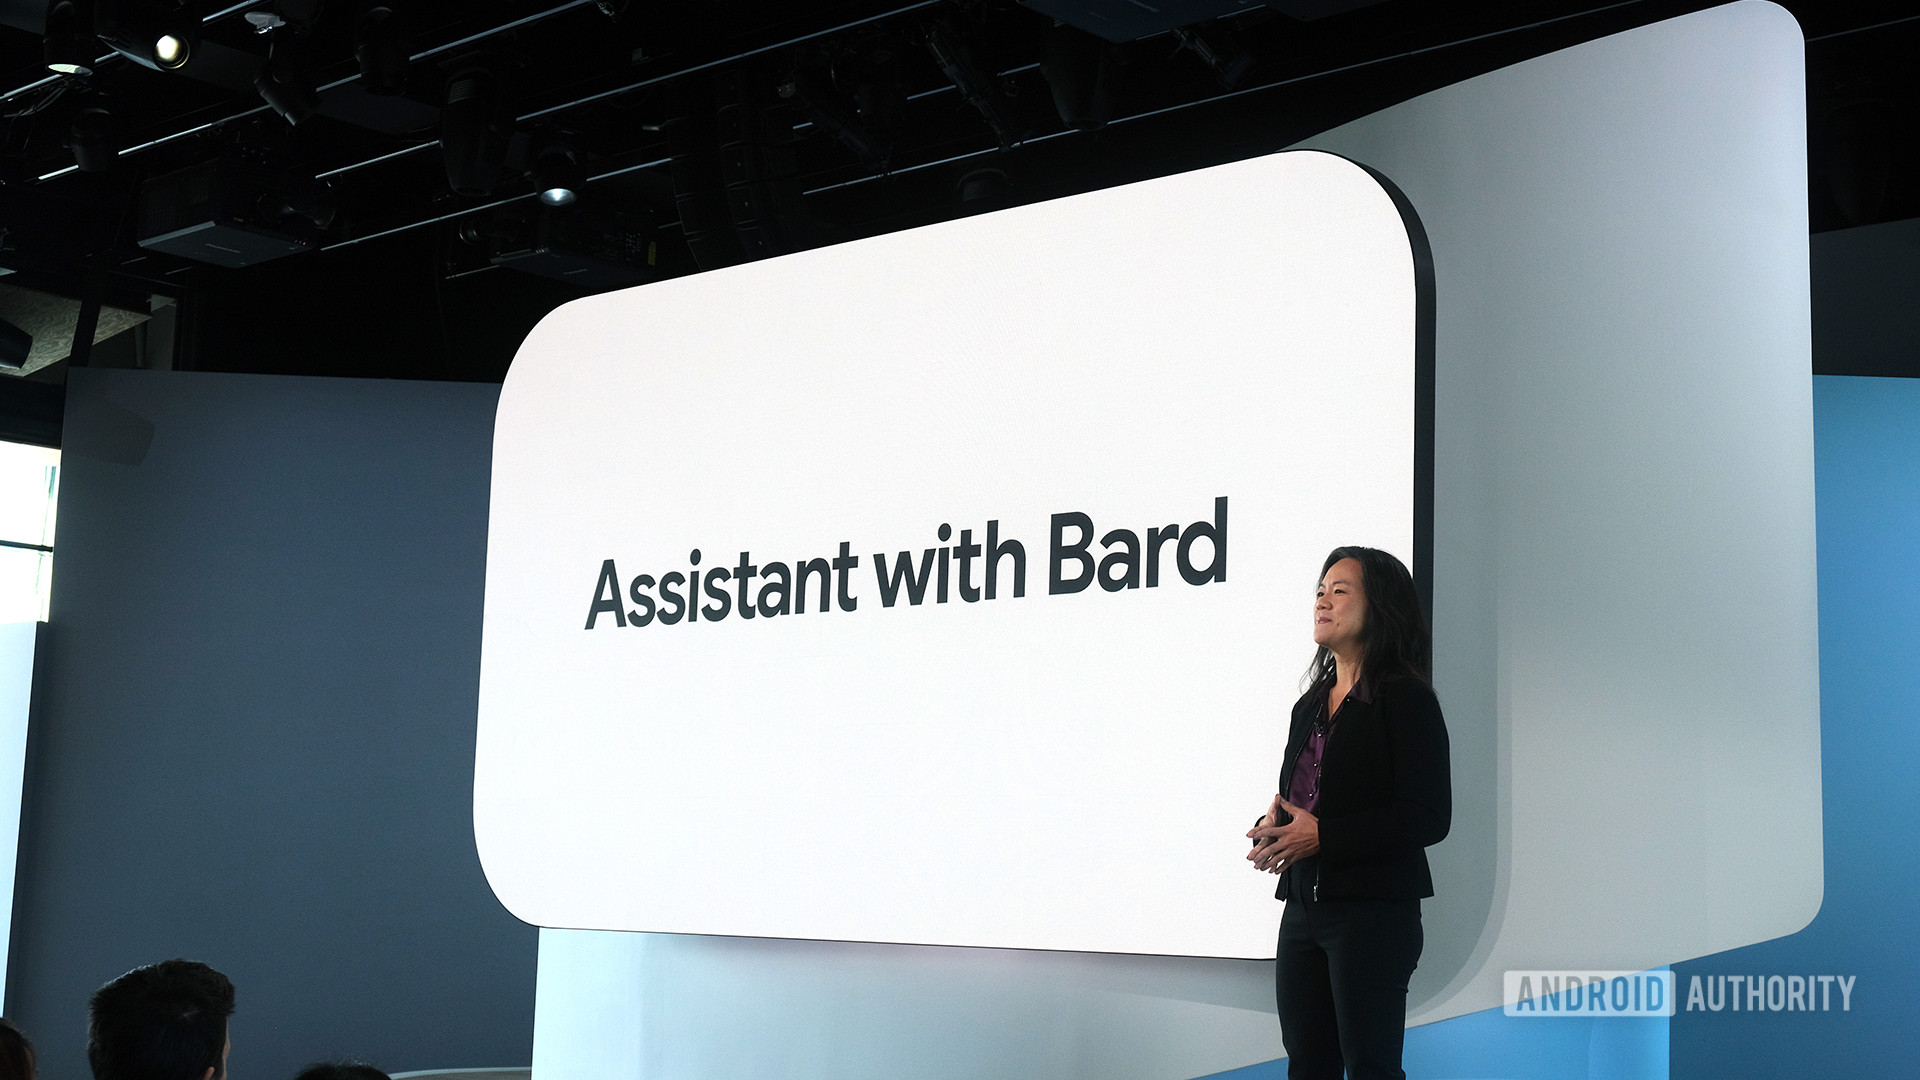 Assistant with Bard Presentation at Made by Google Event 2023